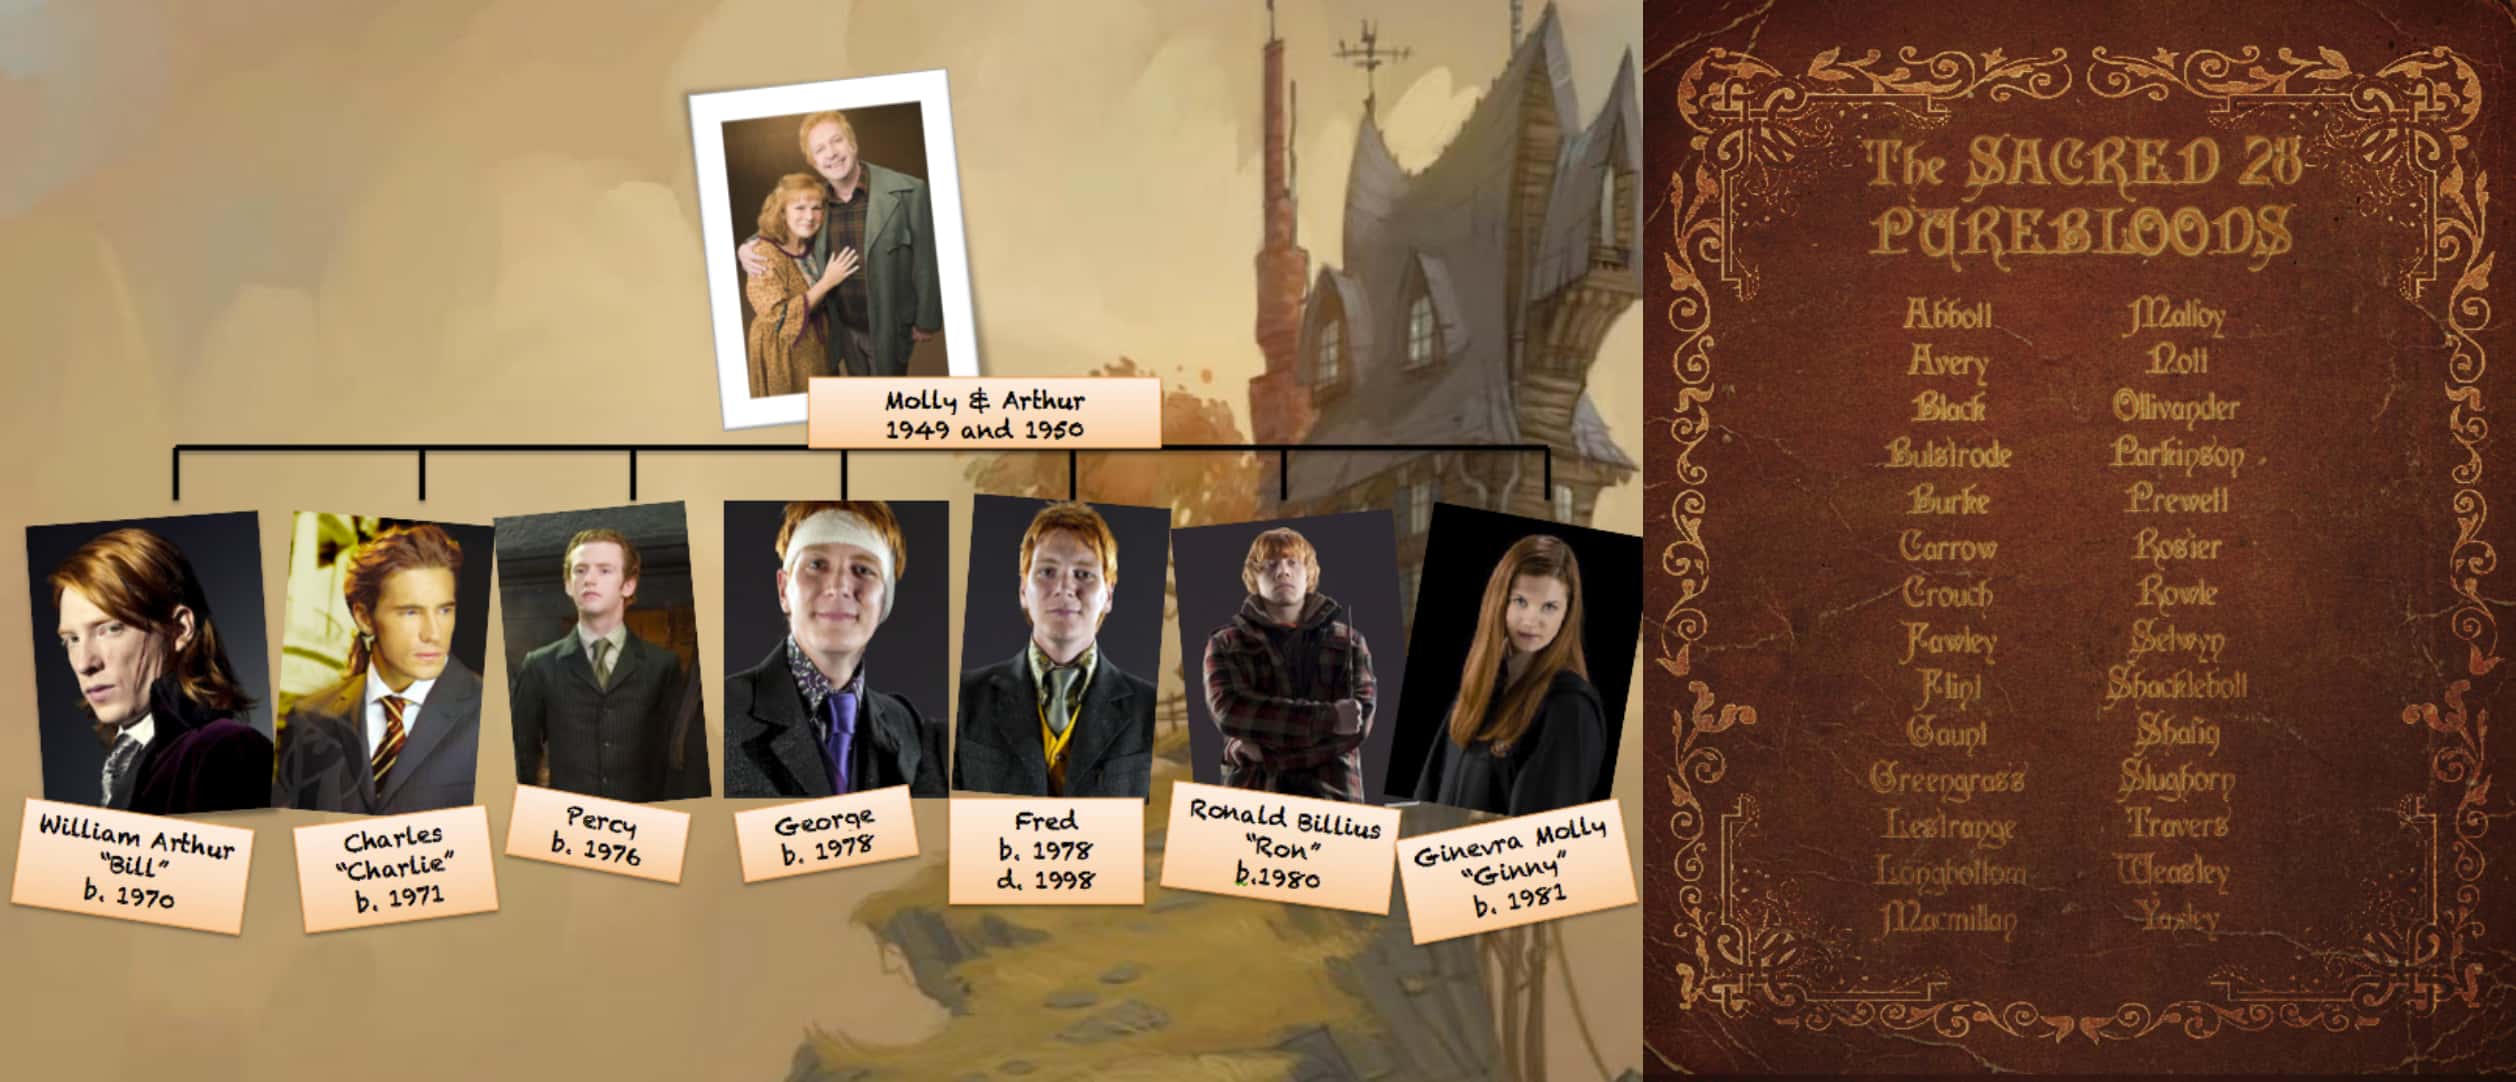 The Weasleys facts 